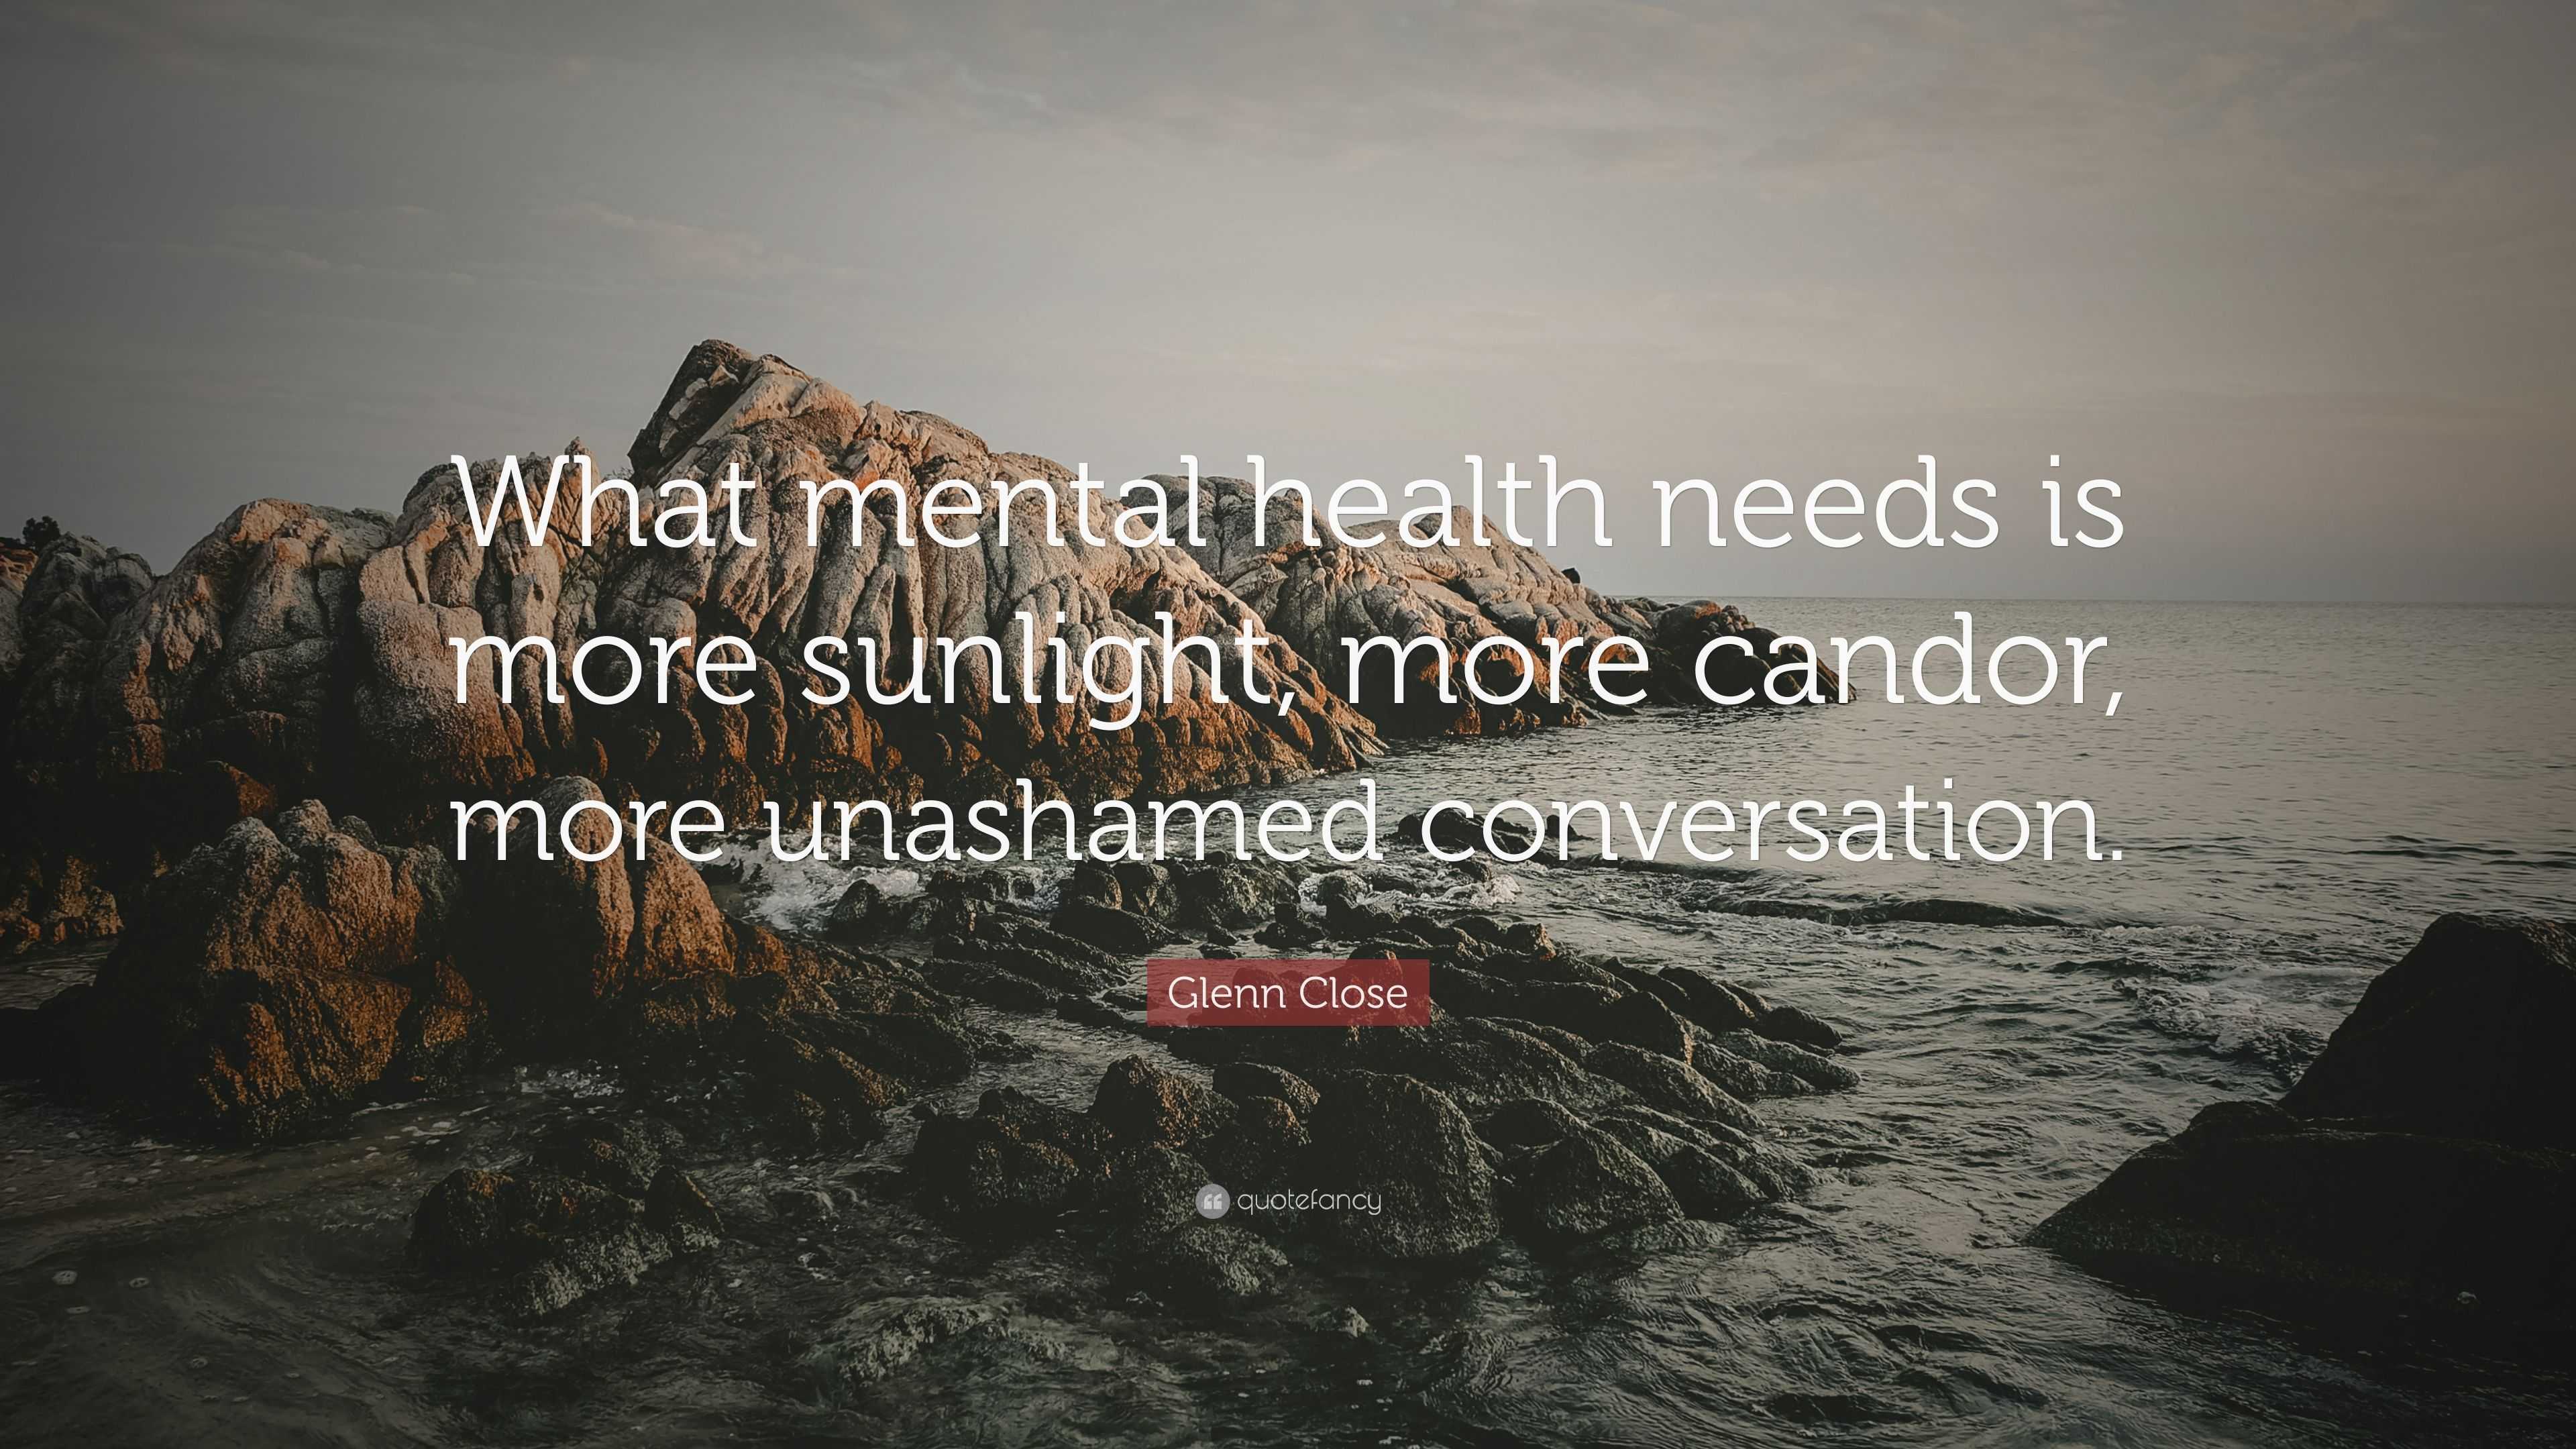 Glenn Close Quote: “What mental health needs is more sunlight, more